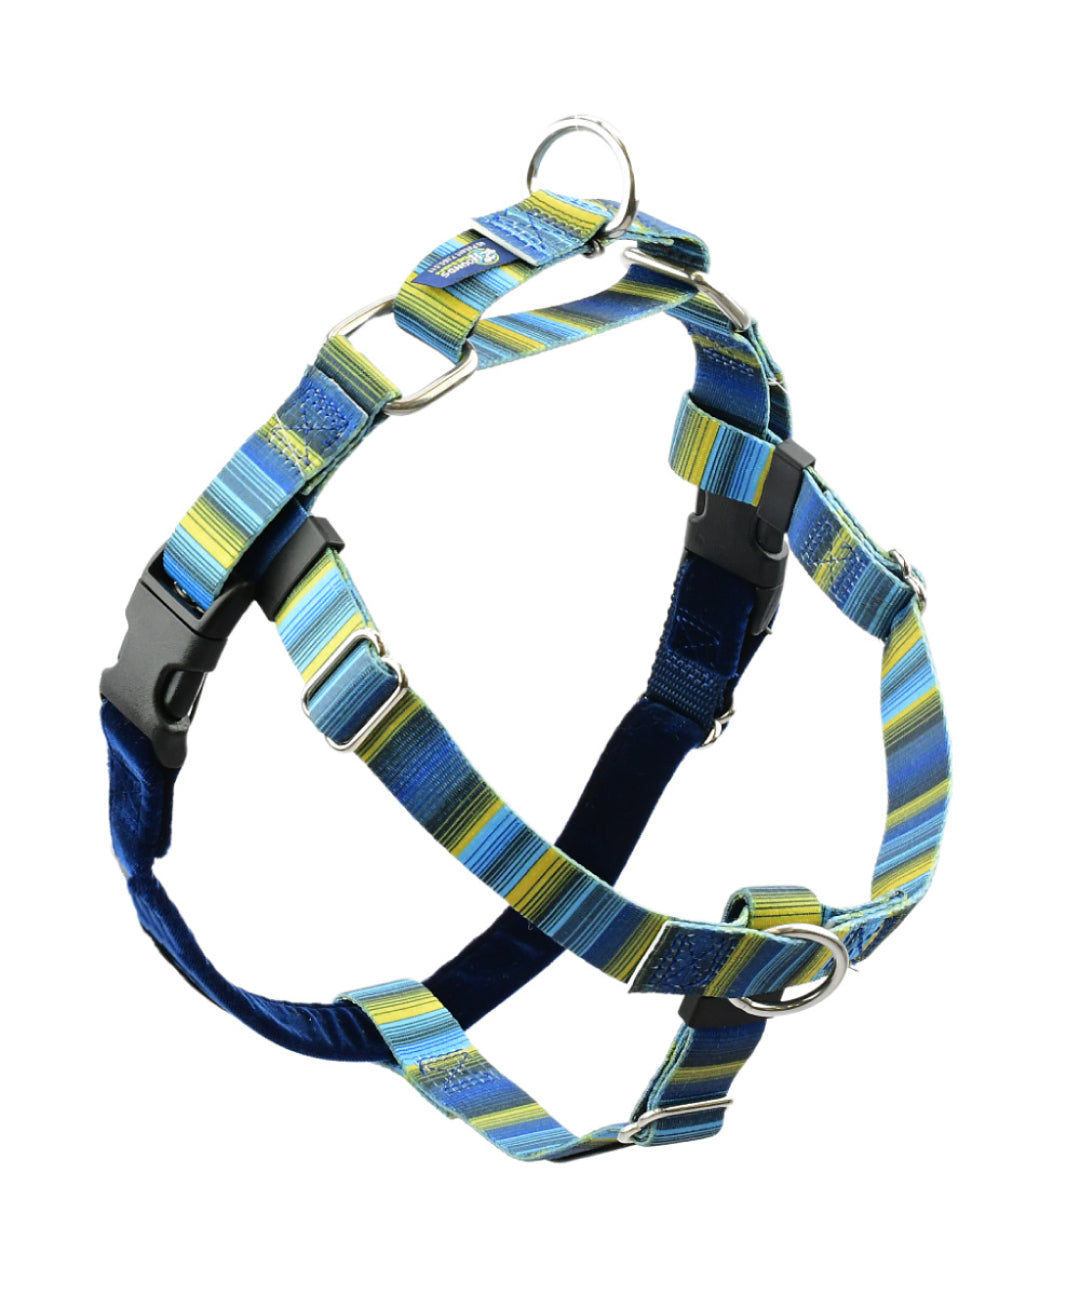 2 Hounds EarthStyle Freedom No-Pull Dog Harness Walking Gear Rover Store XS Clyde 